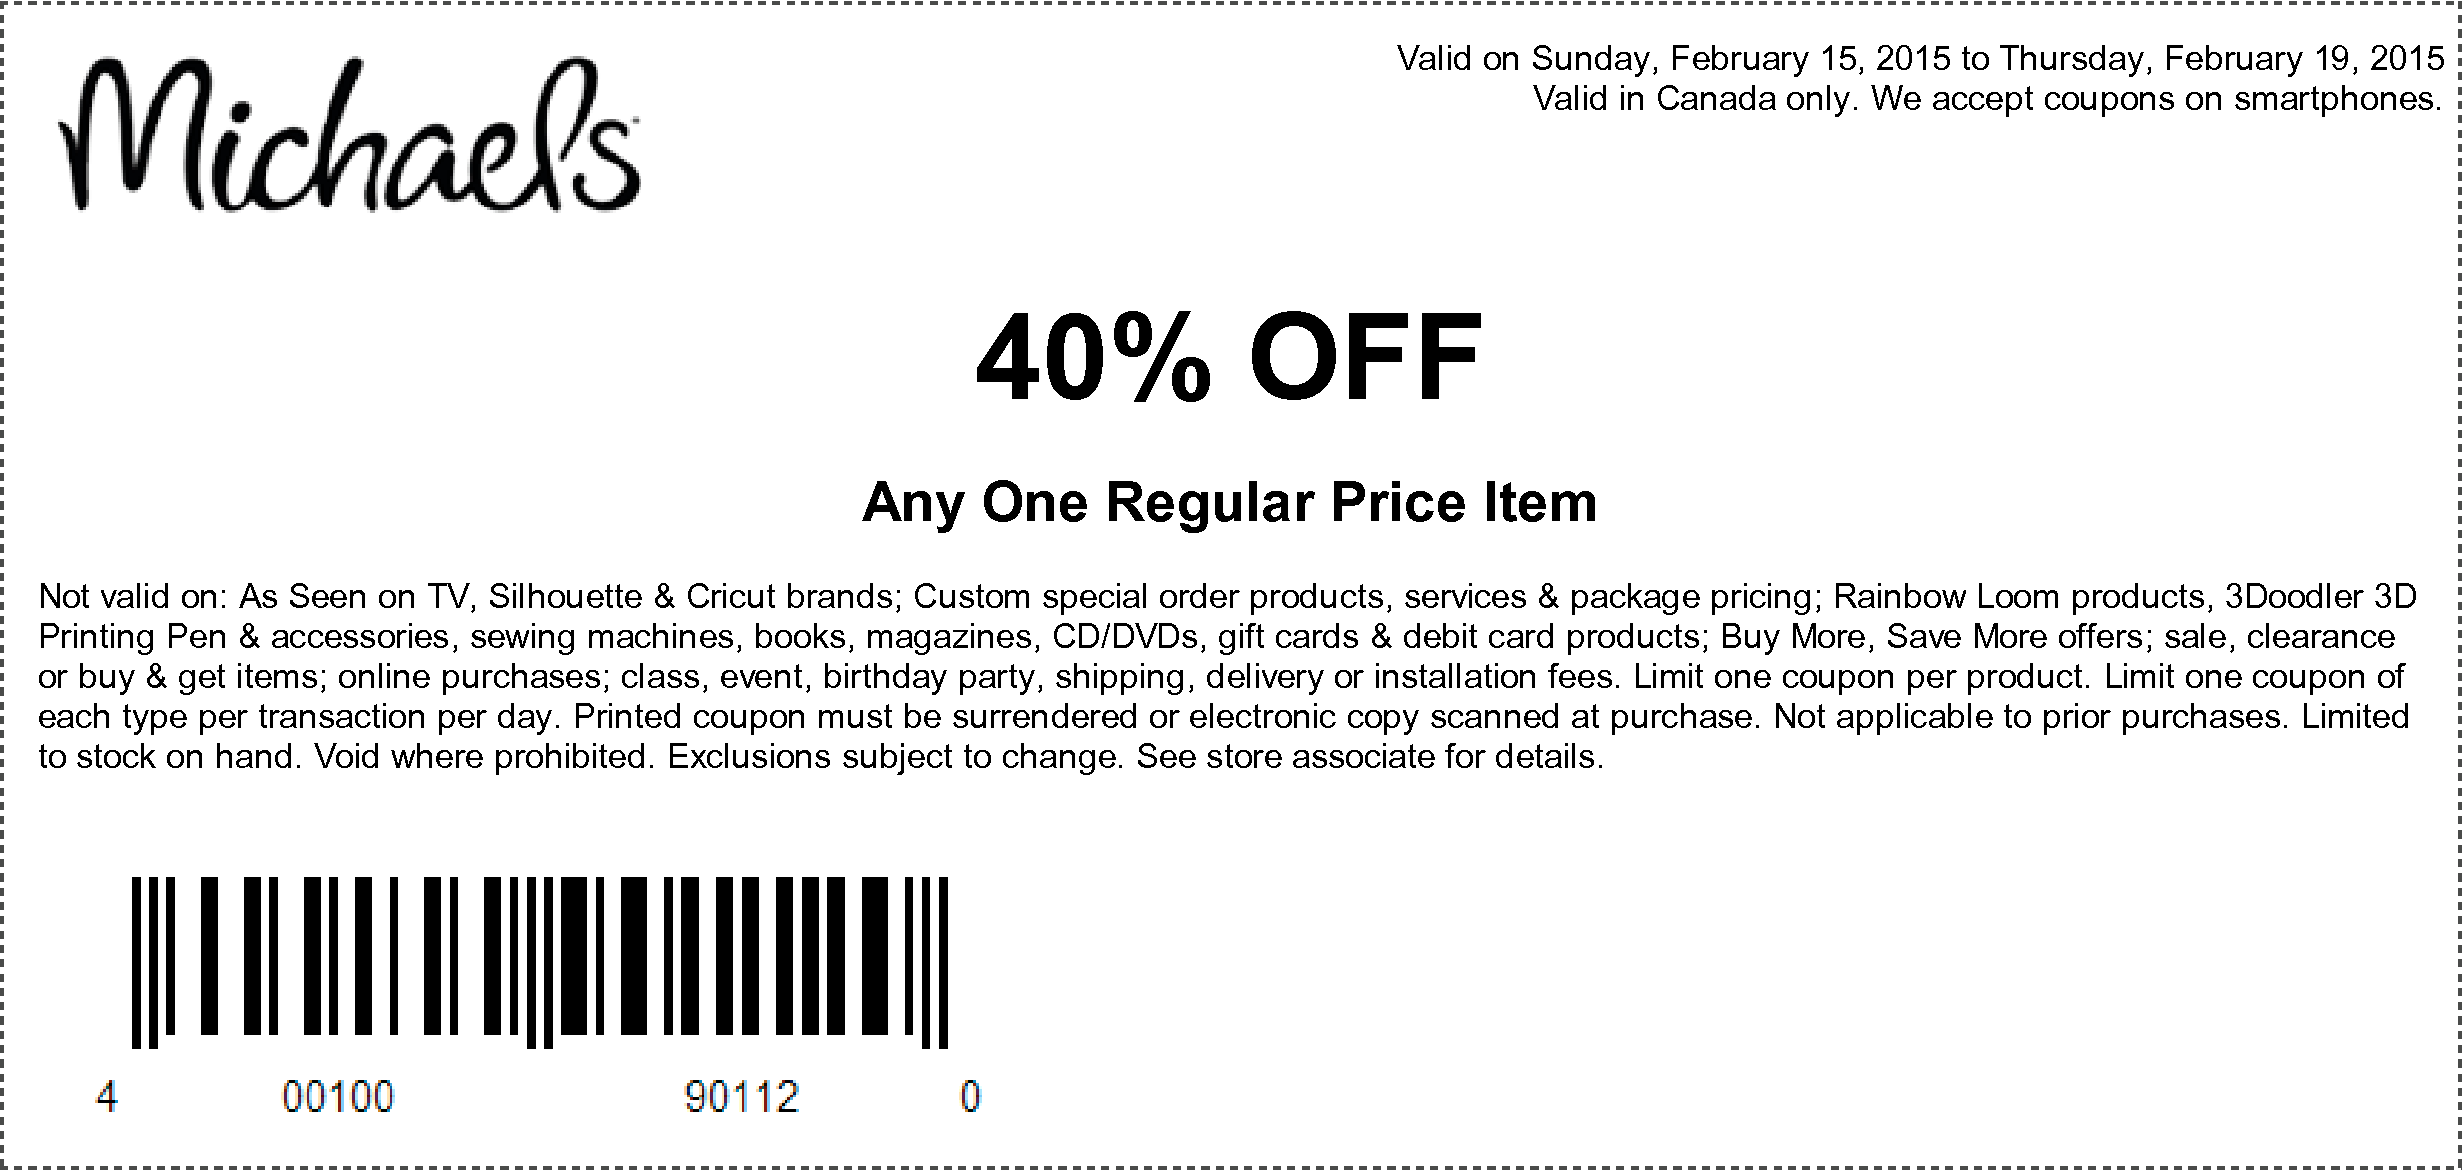 Michaels Coupons 25 Off Your Entire Purchase, 40 Off Any One Regular